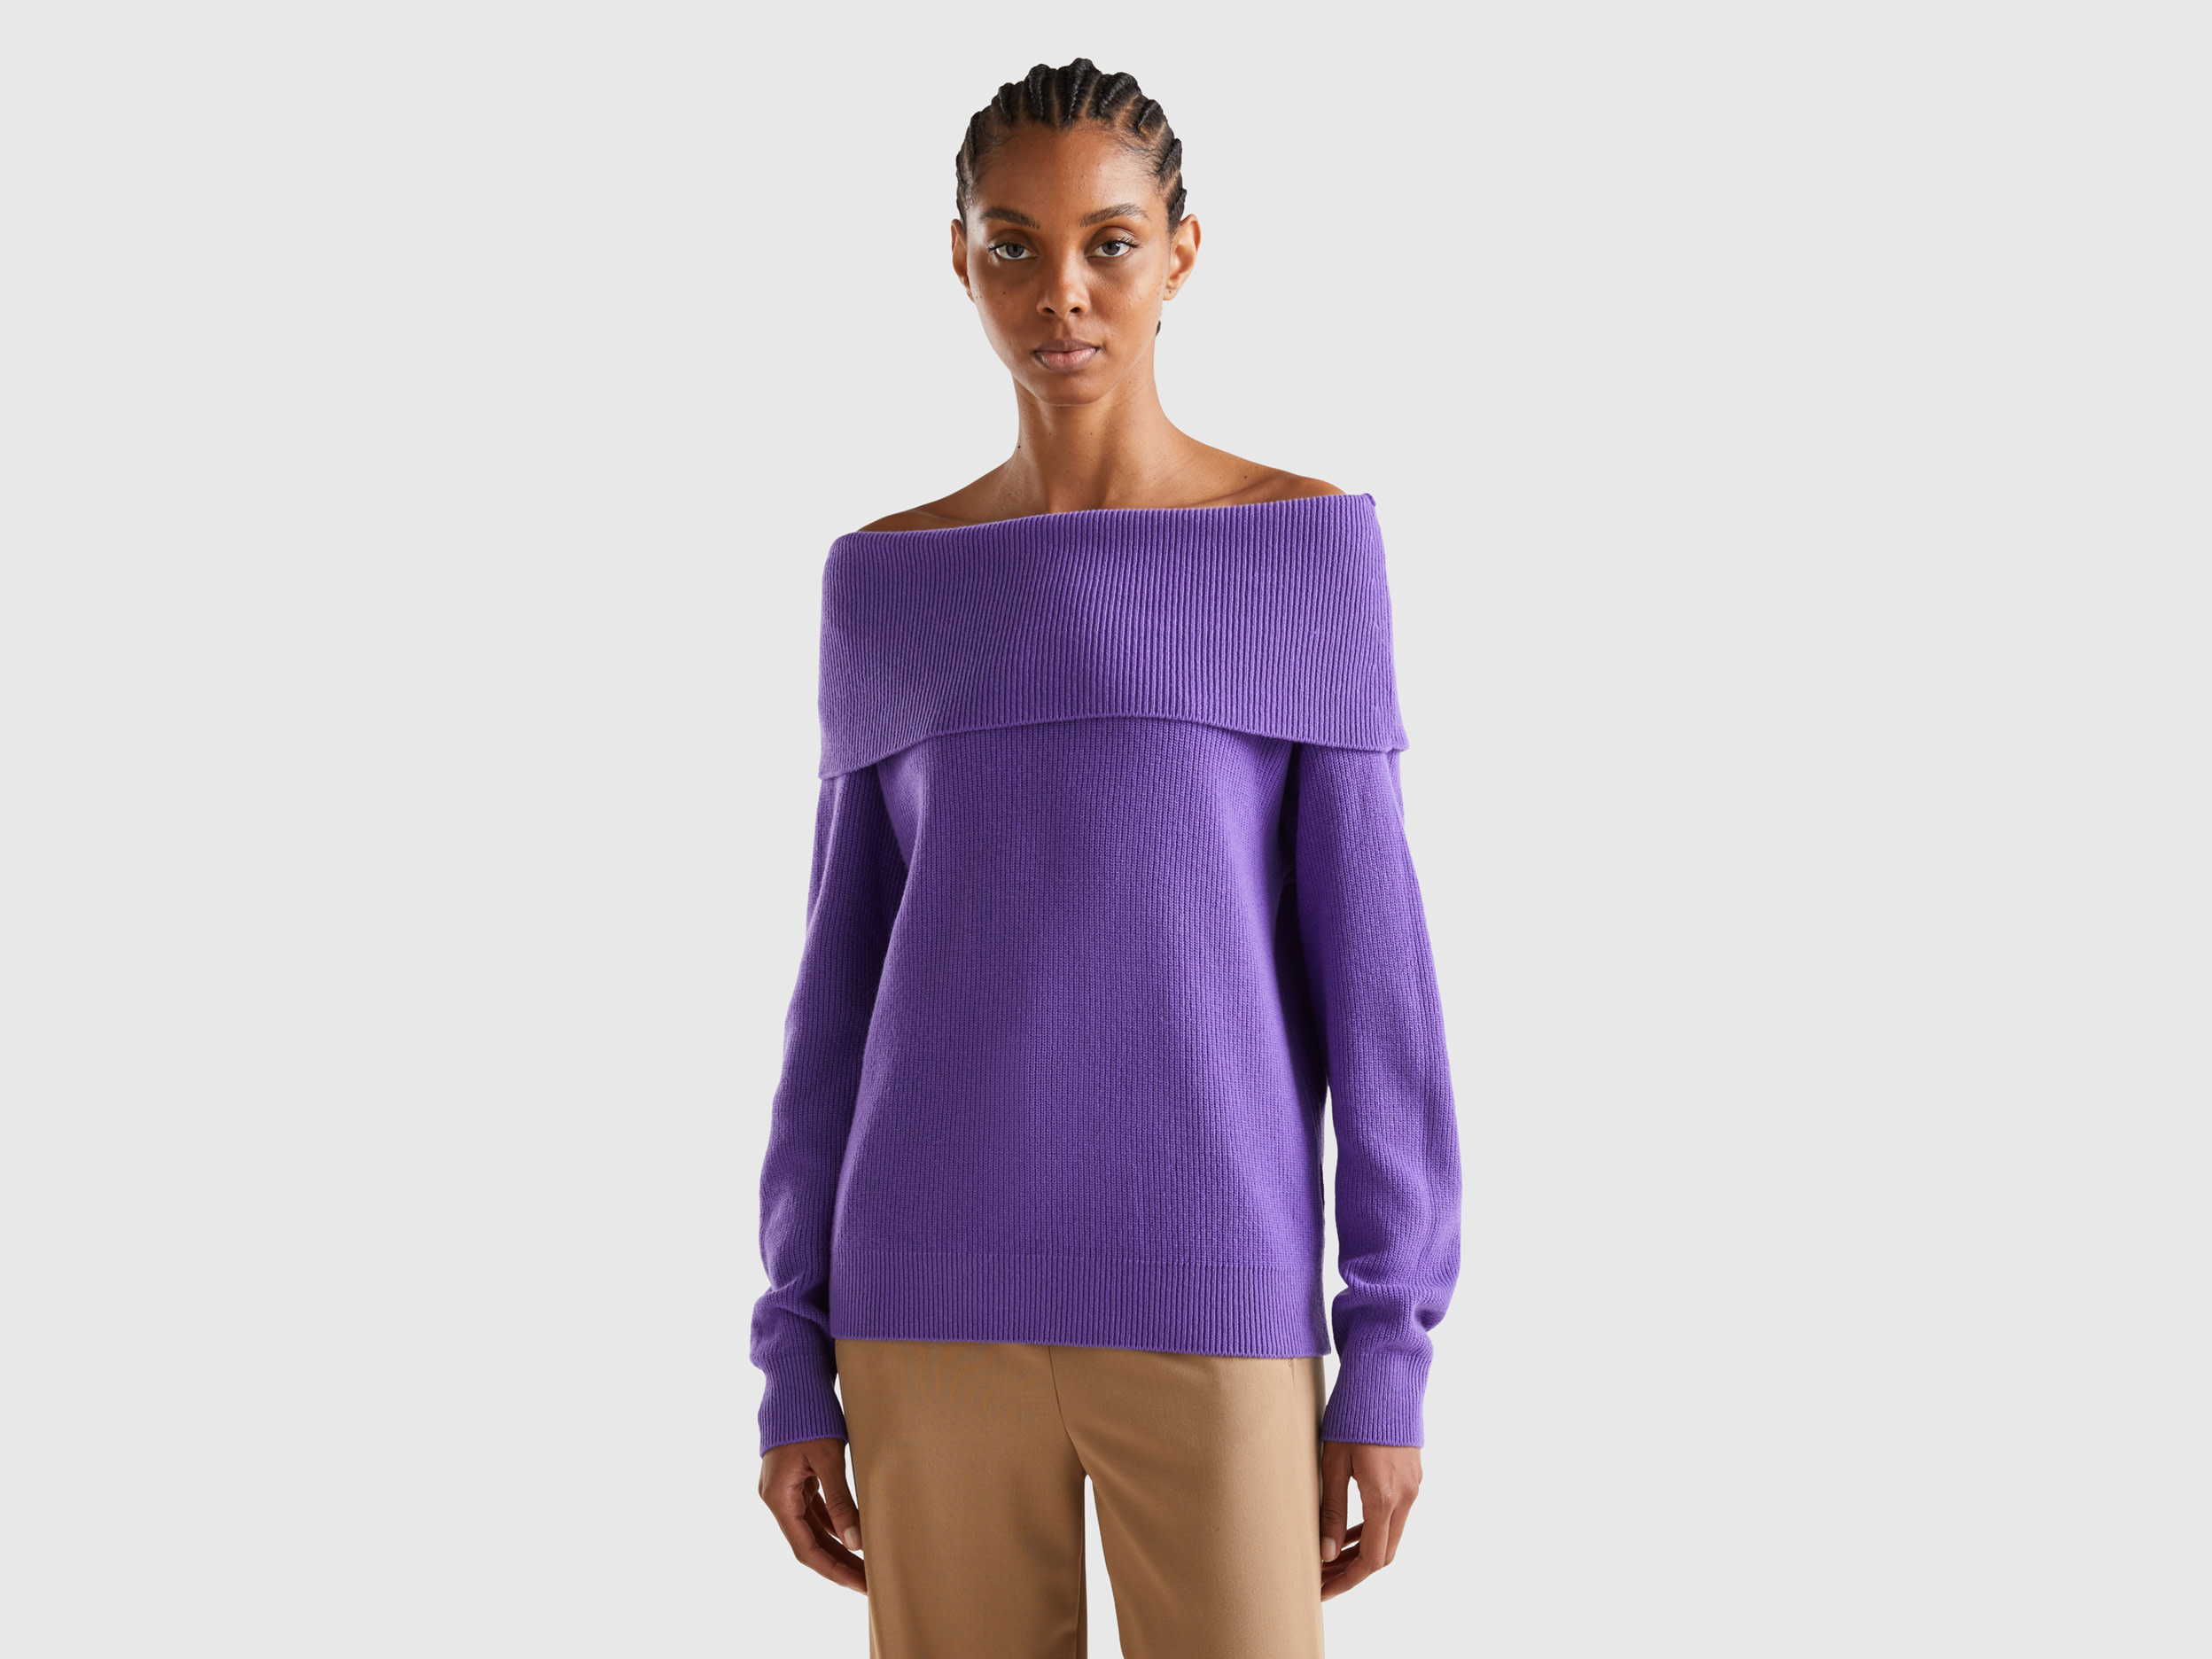 Benetton, Sweater With Bare Shoulders, size XS-S, Violet, Women